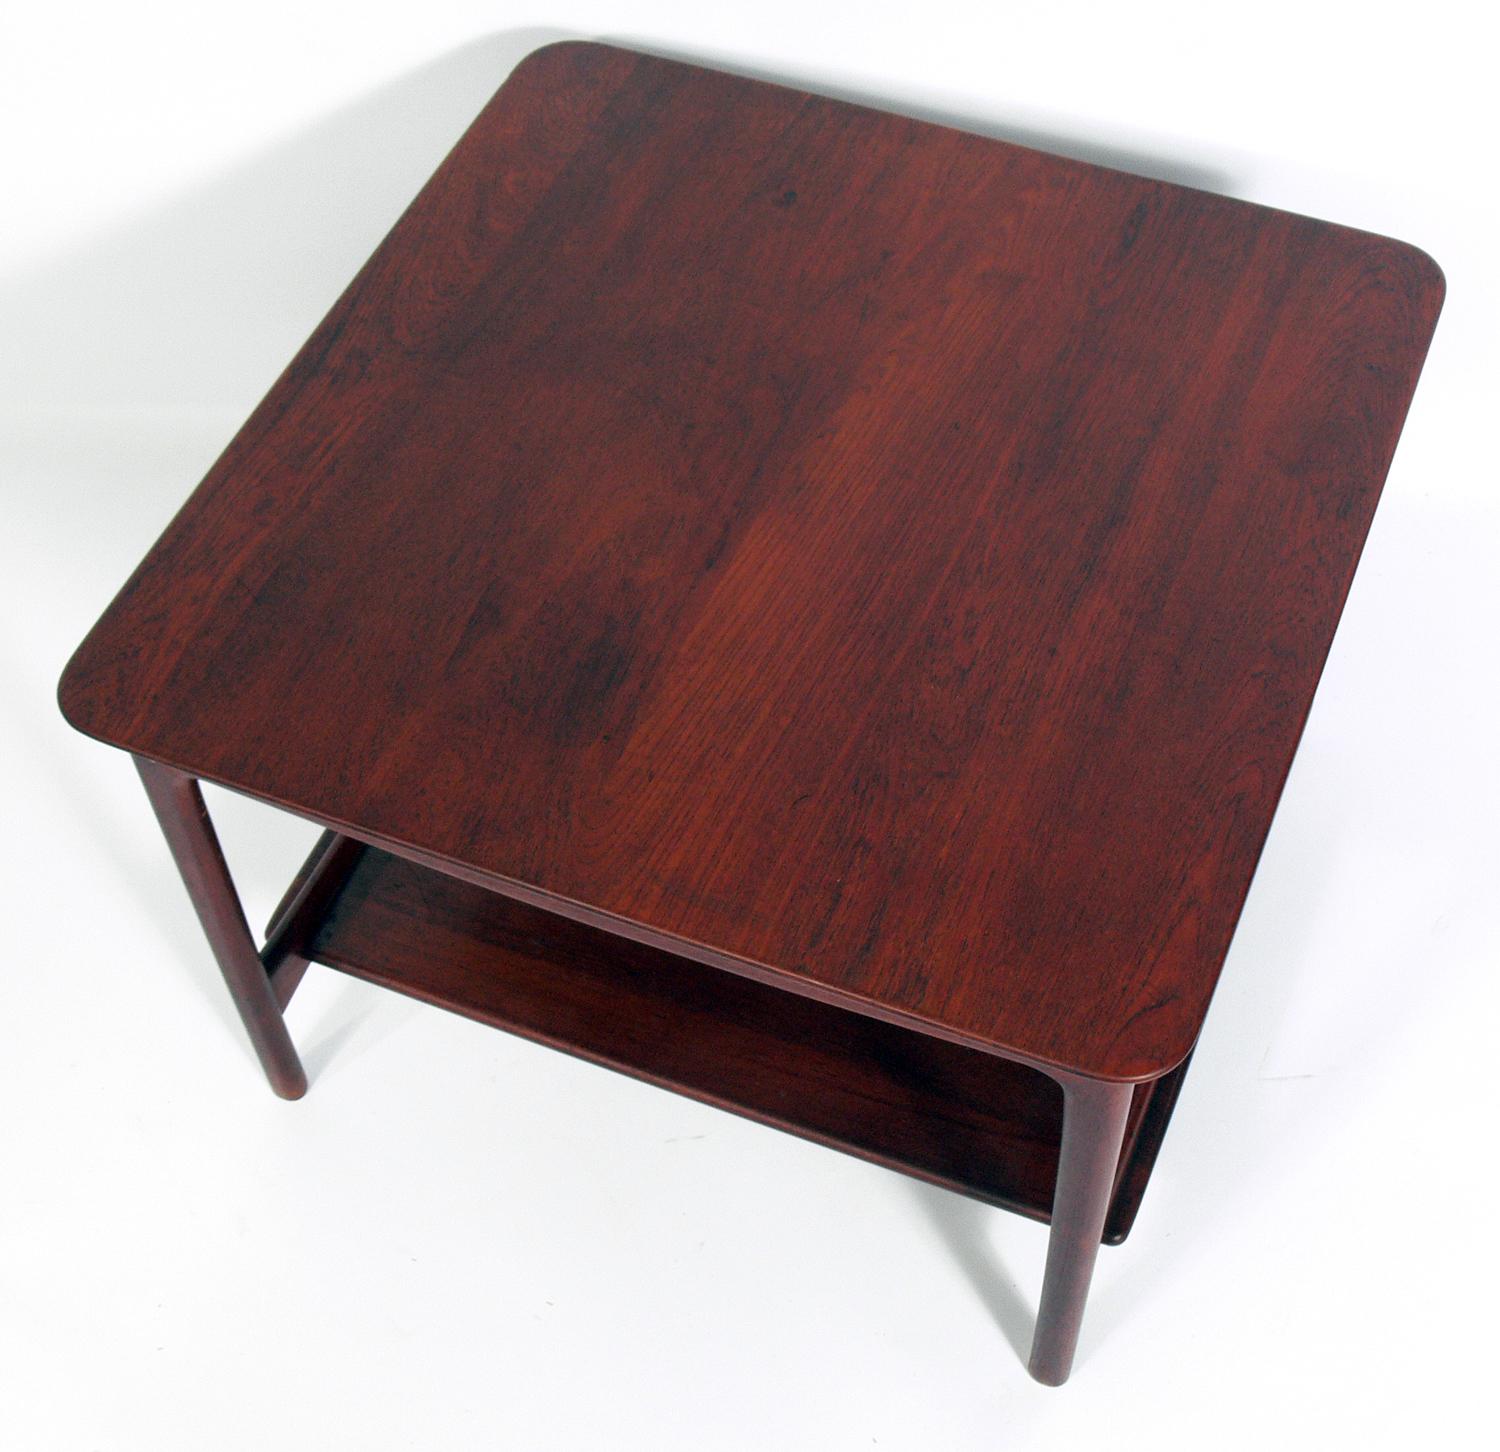 Mid-20th Century Danish Modern Coffee Table by Peter Hvidt